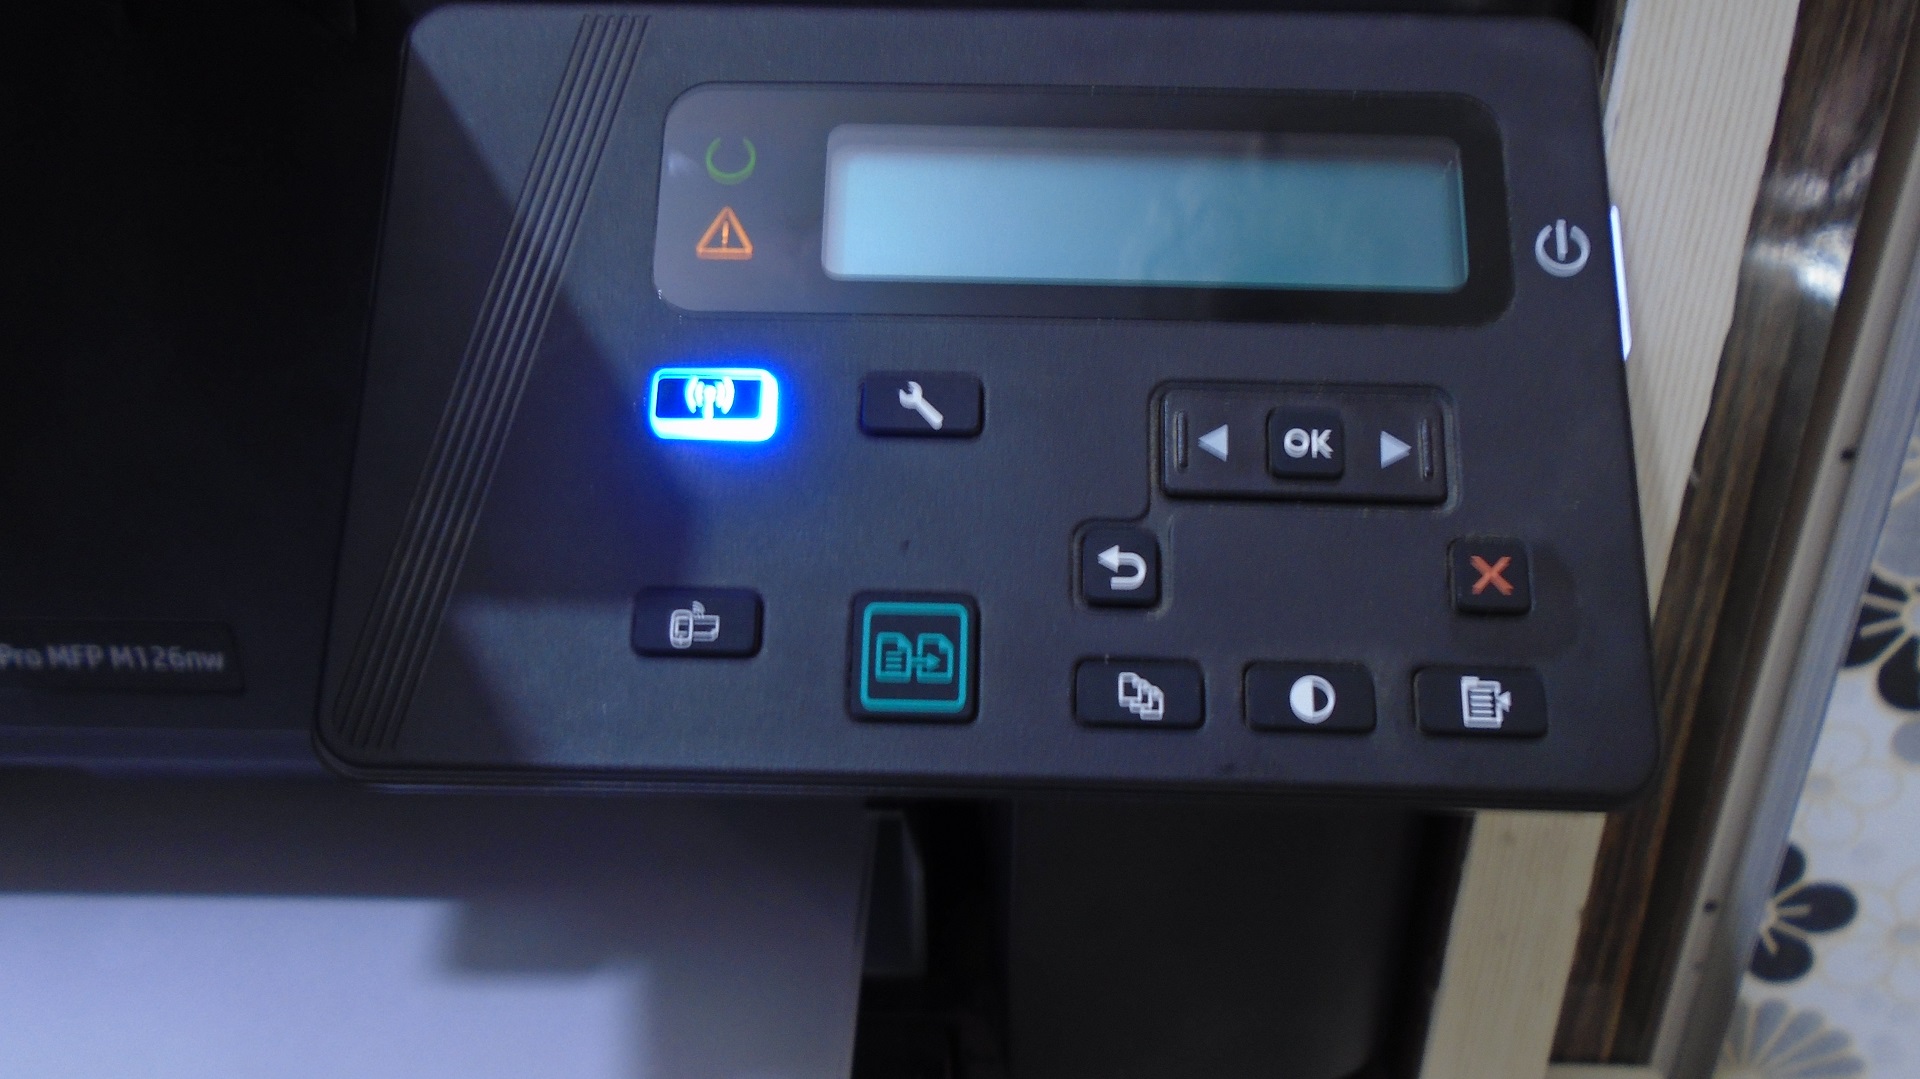 hp Laser jet Pro MFP M126nw control panel shows nothing ...